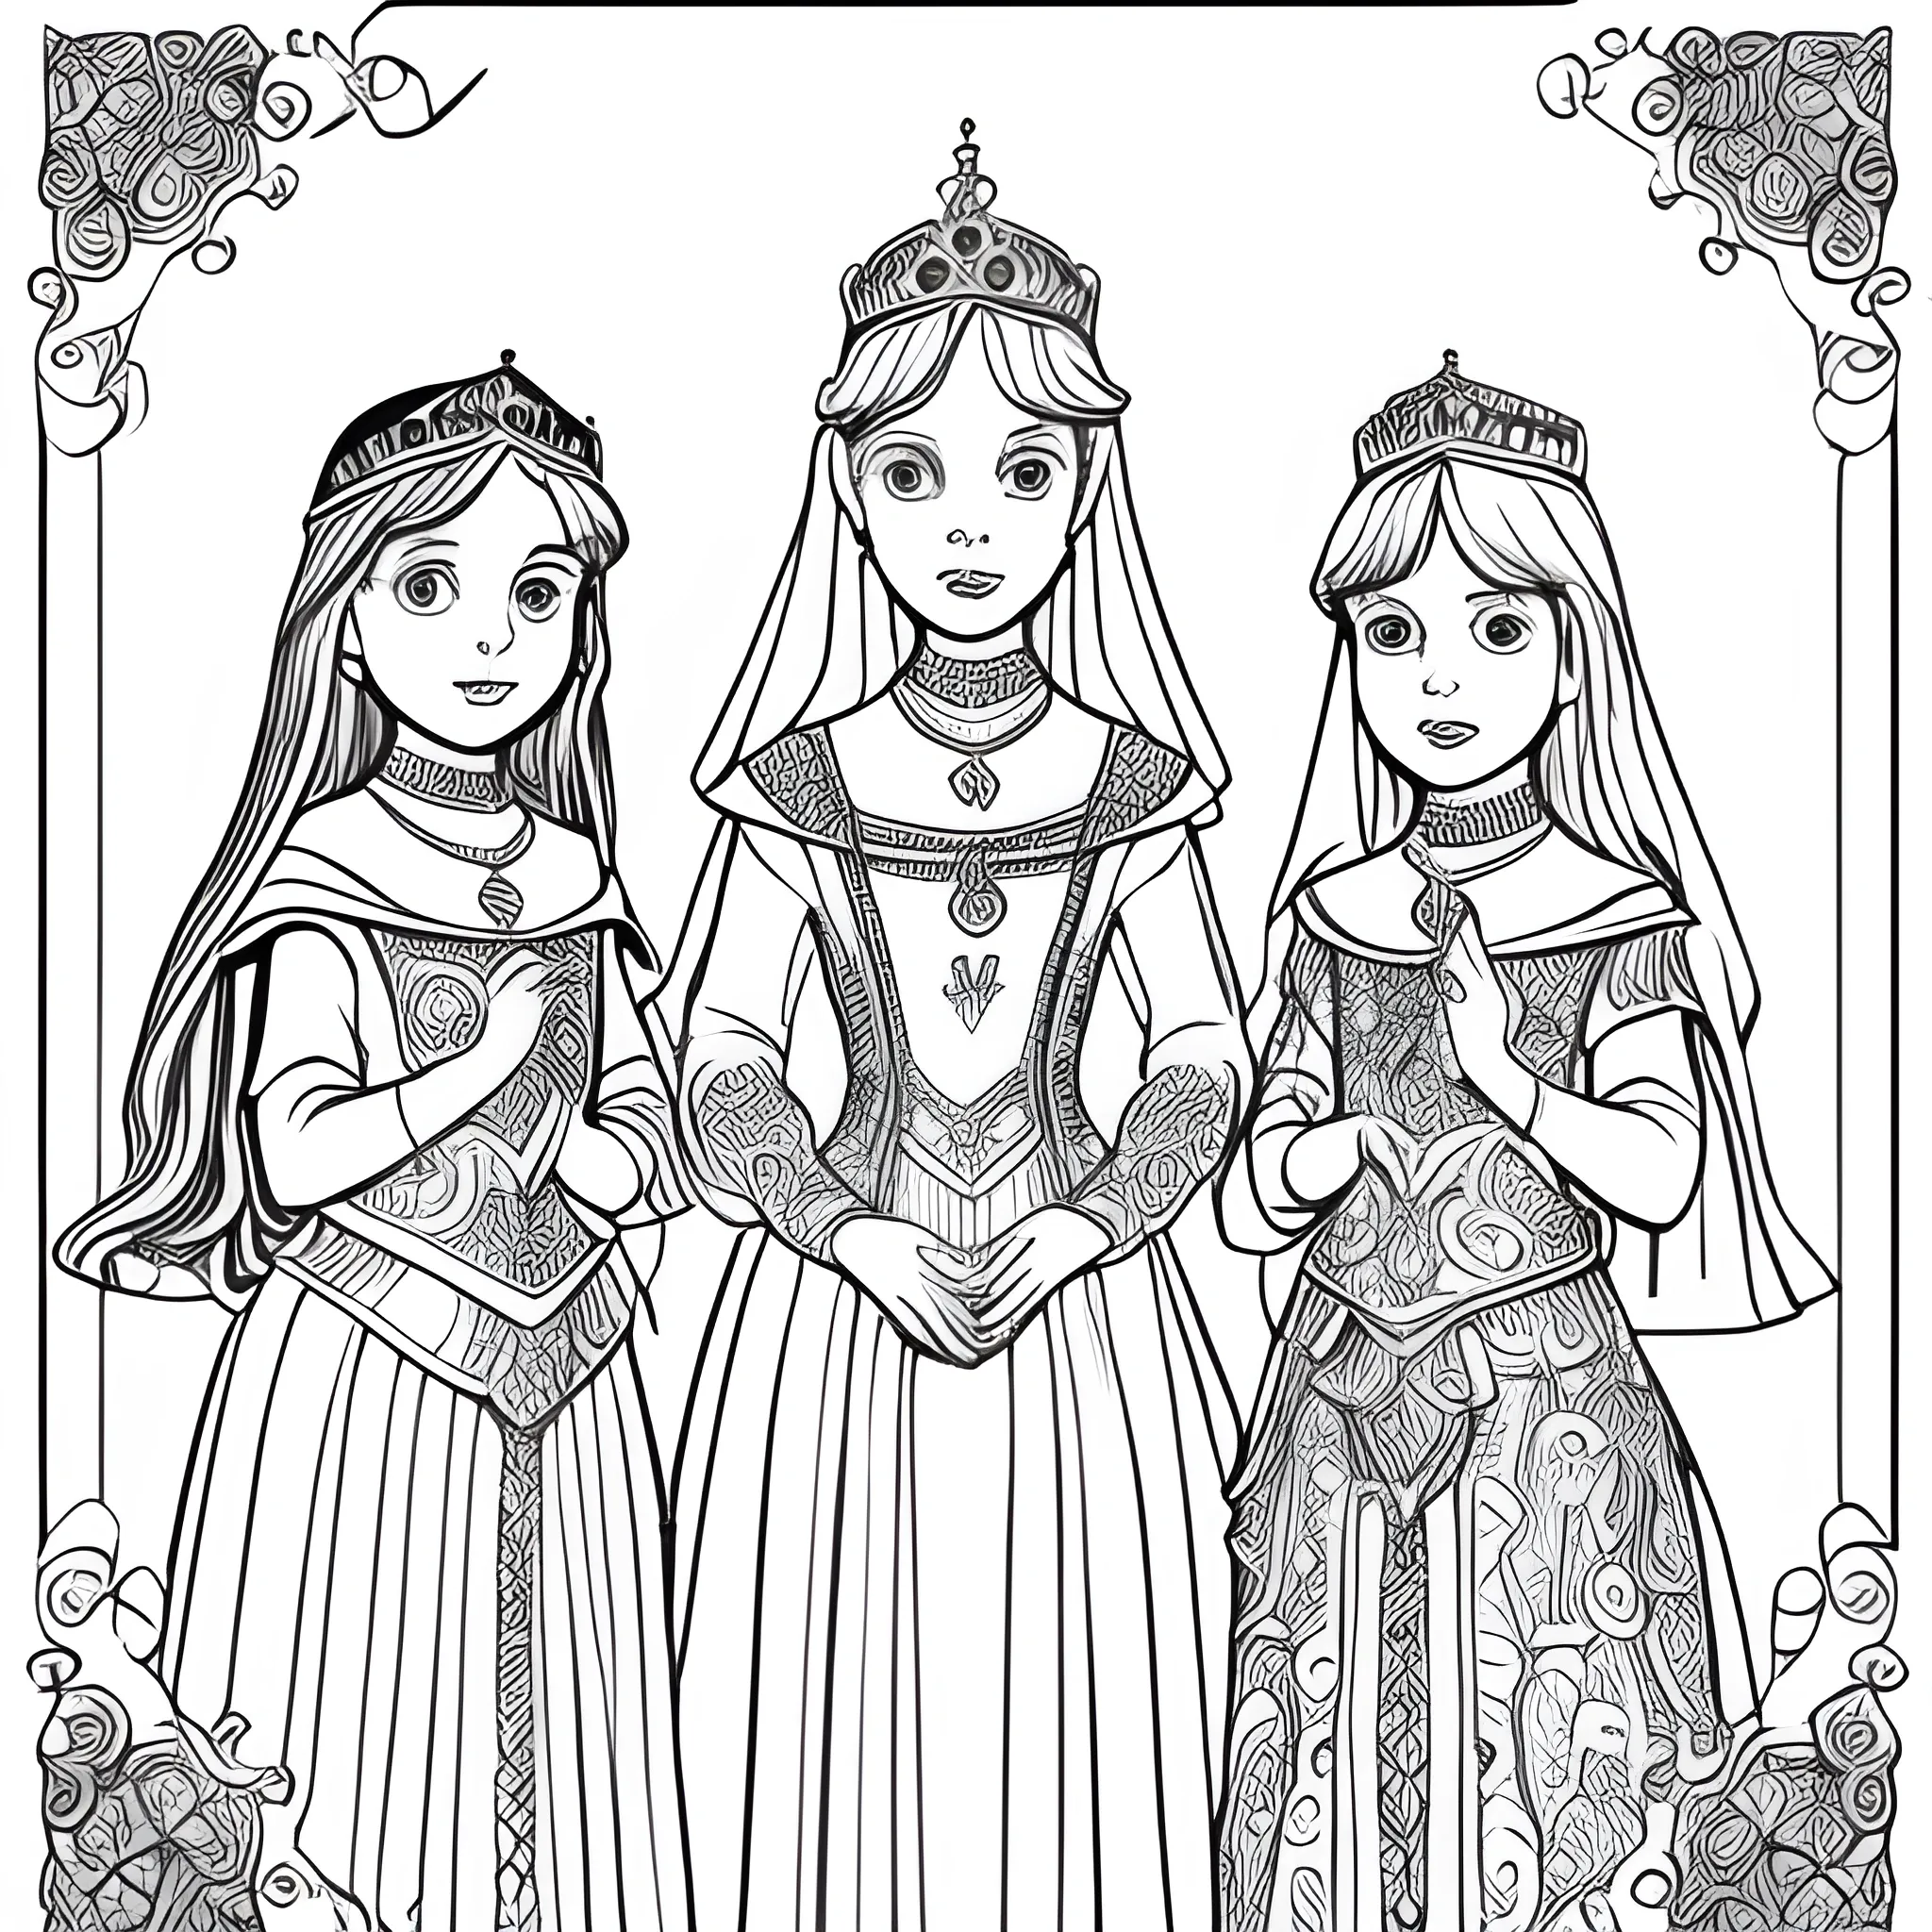 Colouring page, 3 sisters, not any princesses, they shouldn't be wearing a lot of jewellery, mordern
